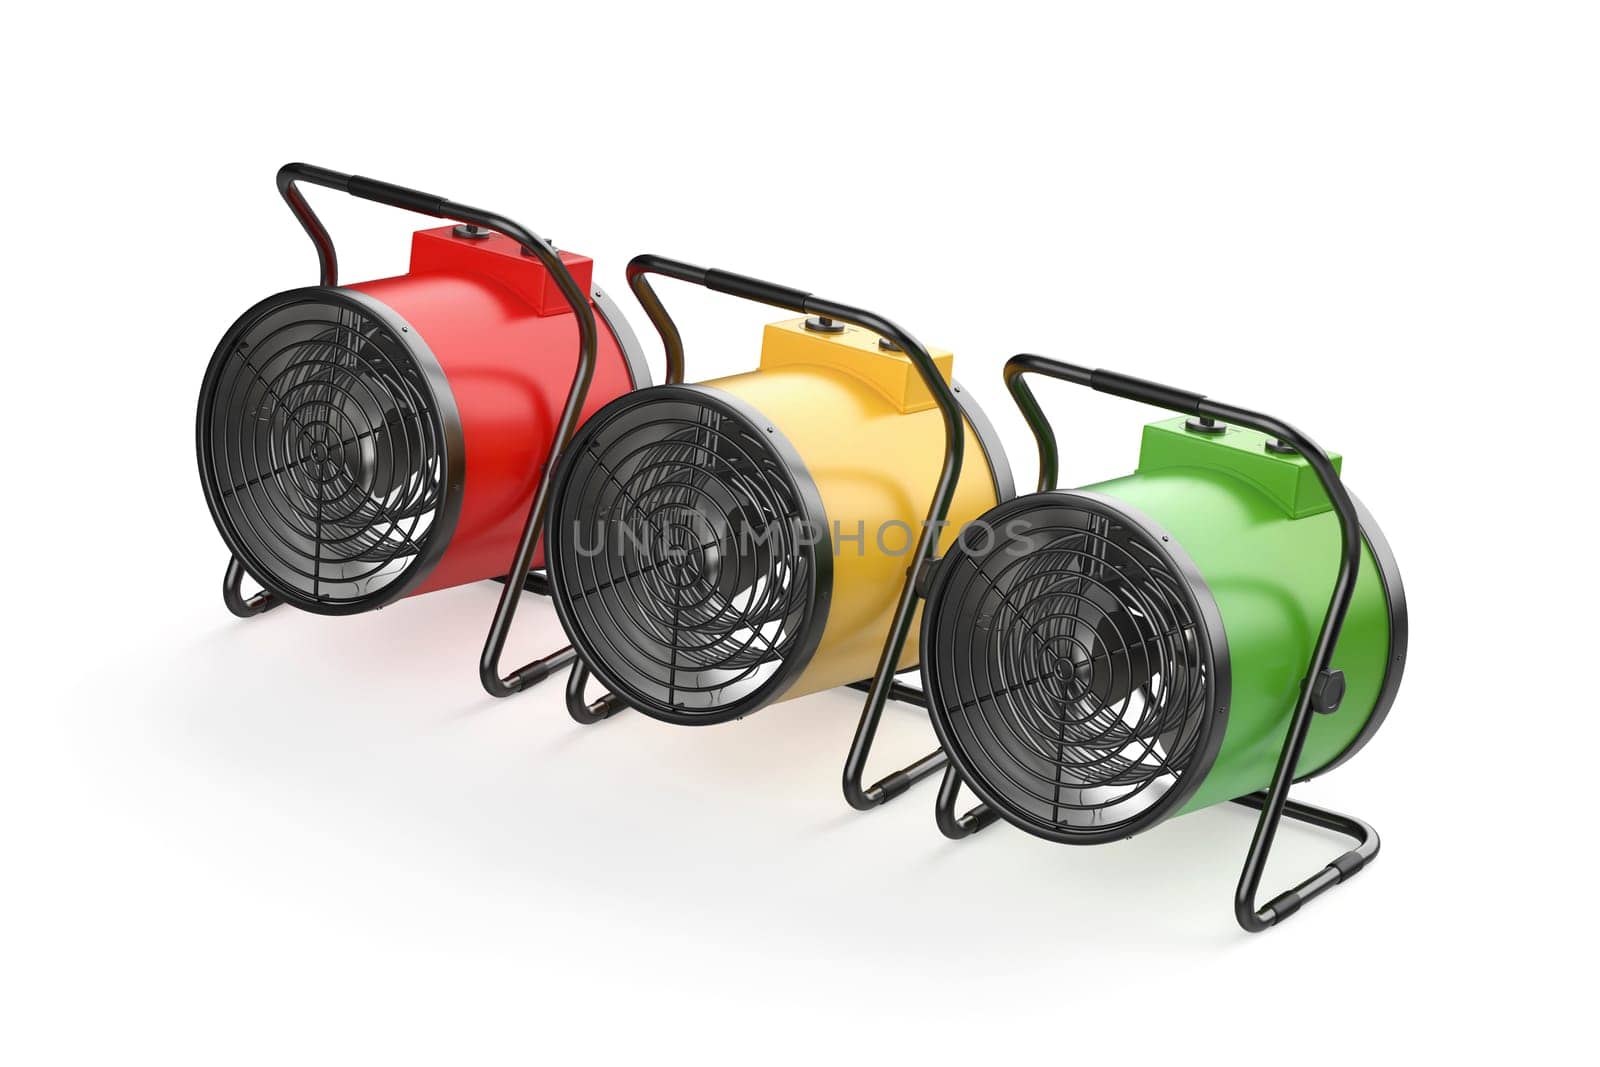 Three industrial electric fan heaters with different colors on white background